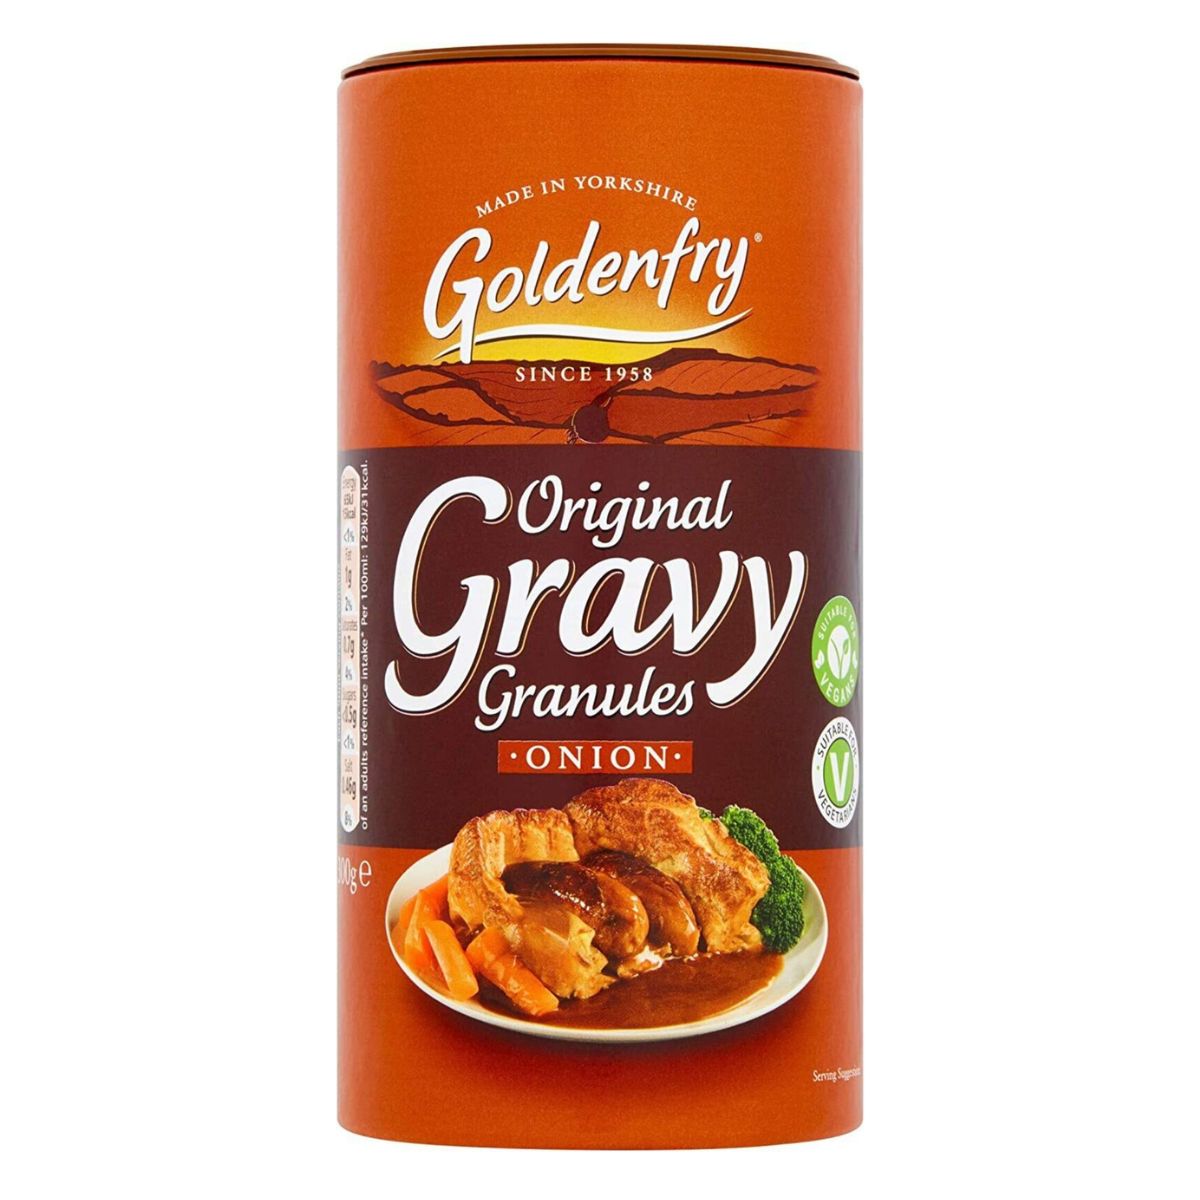 A can of Goldenfry - Onion Gravy Granules - 300g on a white background.